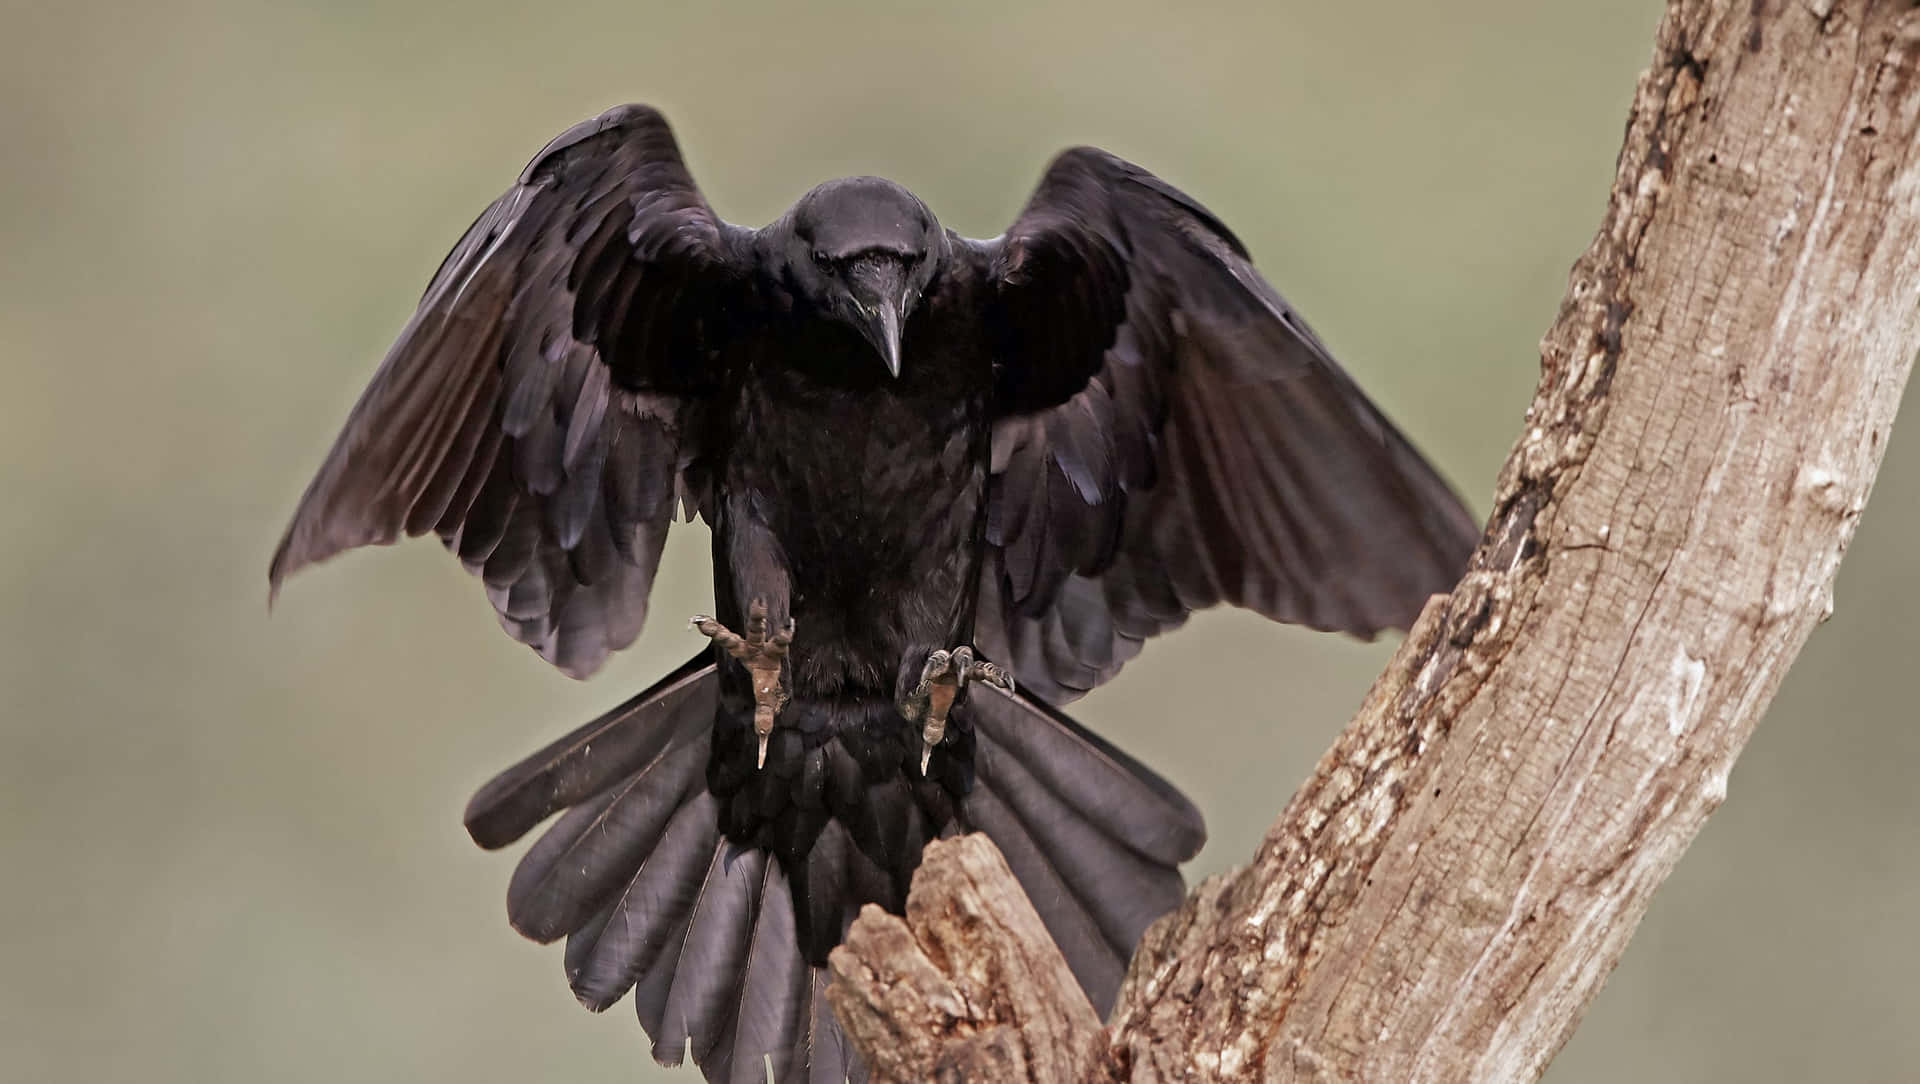 A large, black raven perched atop a tree branch